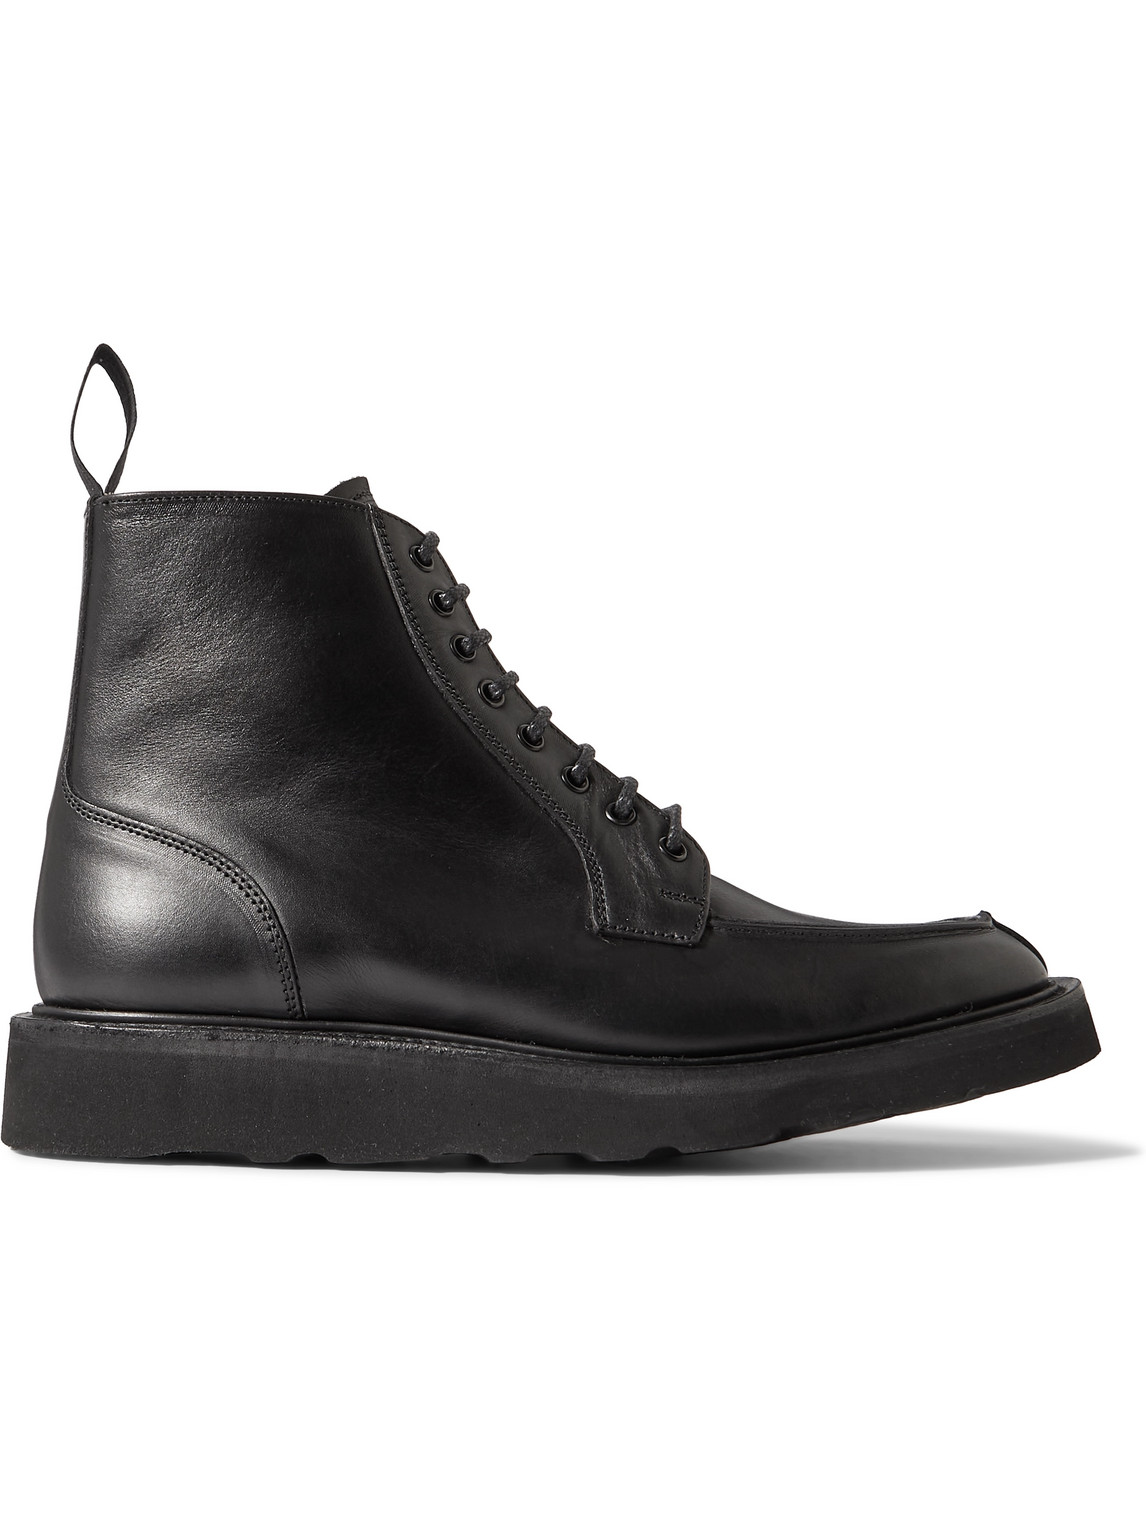 Lawrence Leather Boots